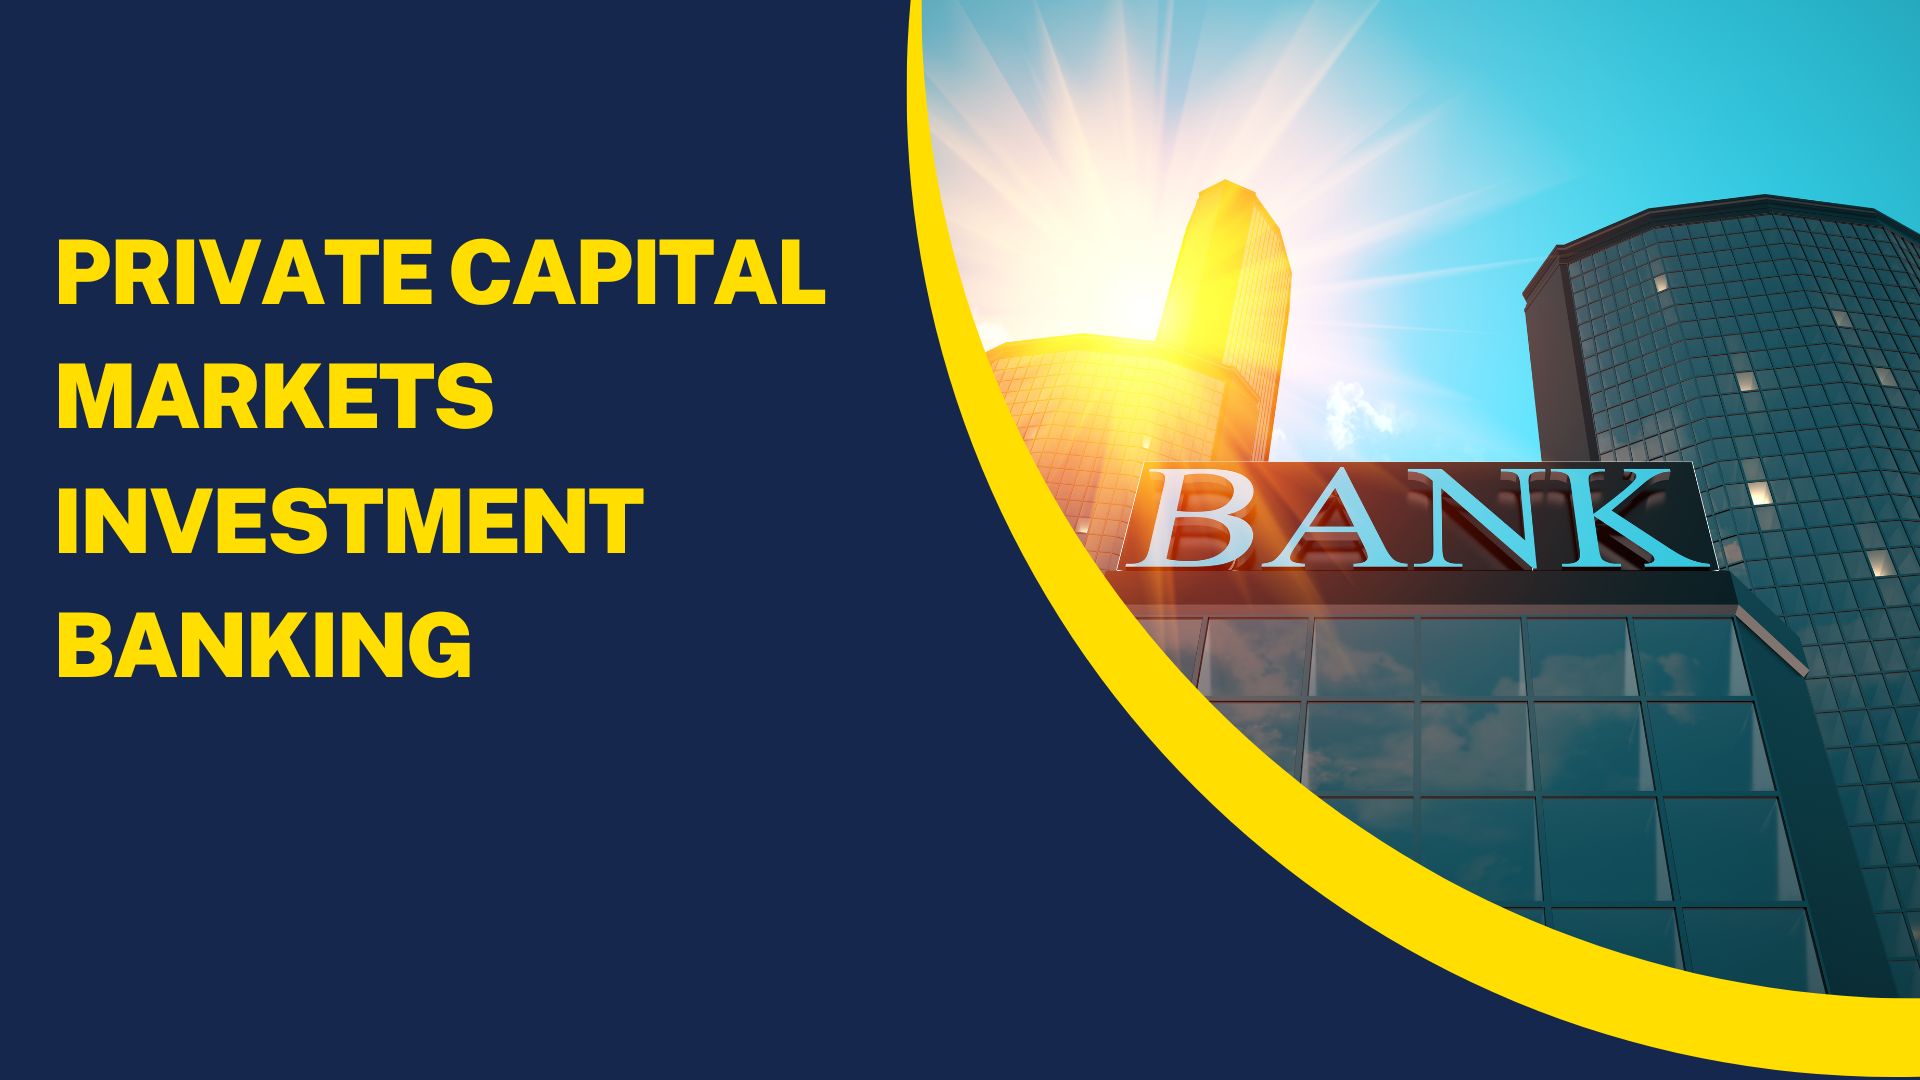 Private Capital Markets Investment Banking